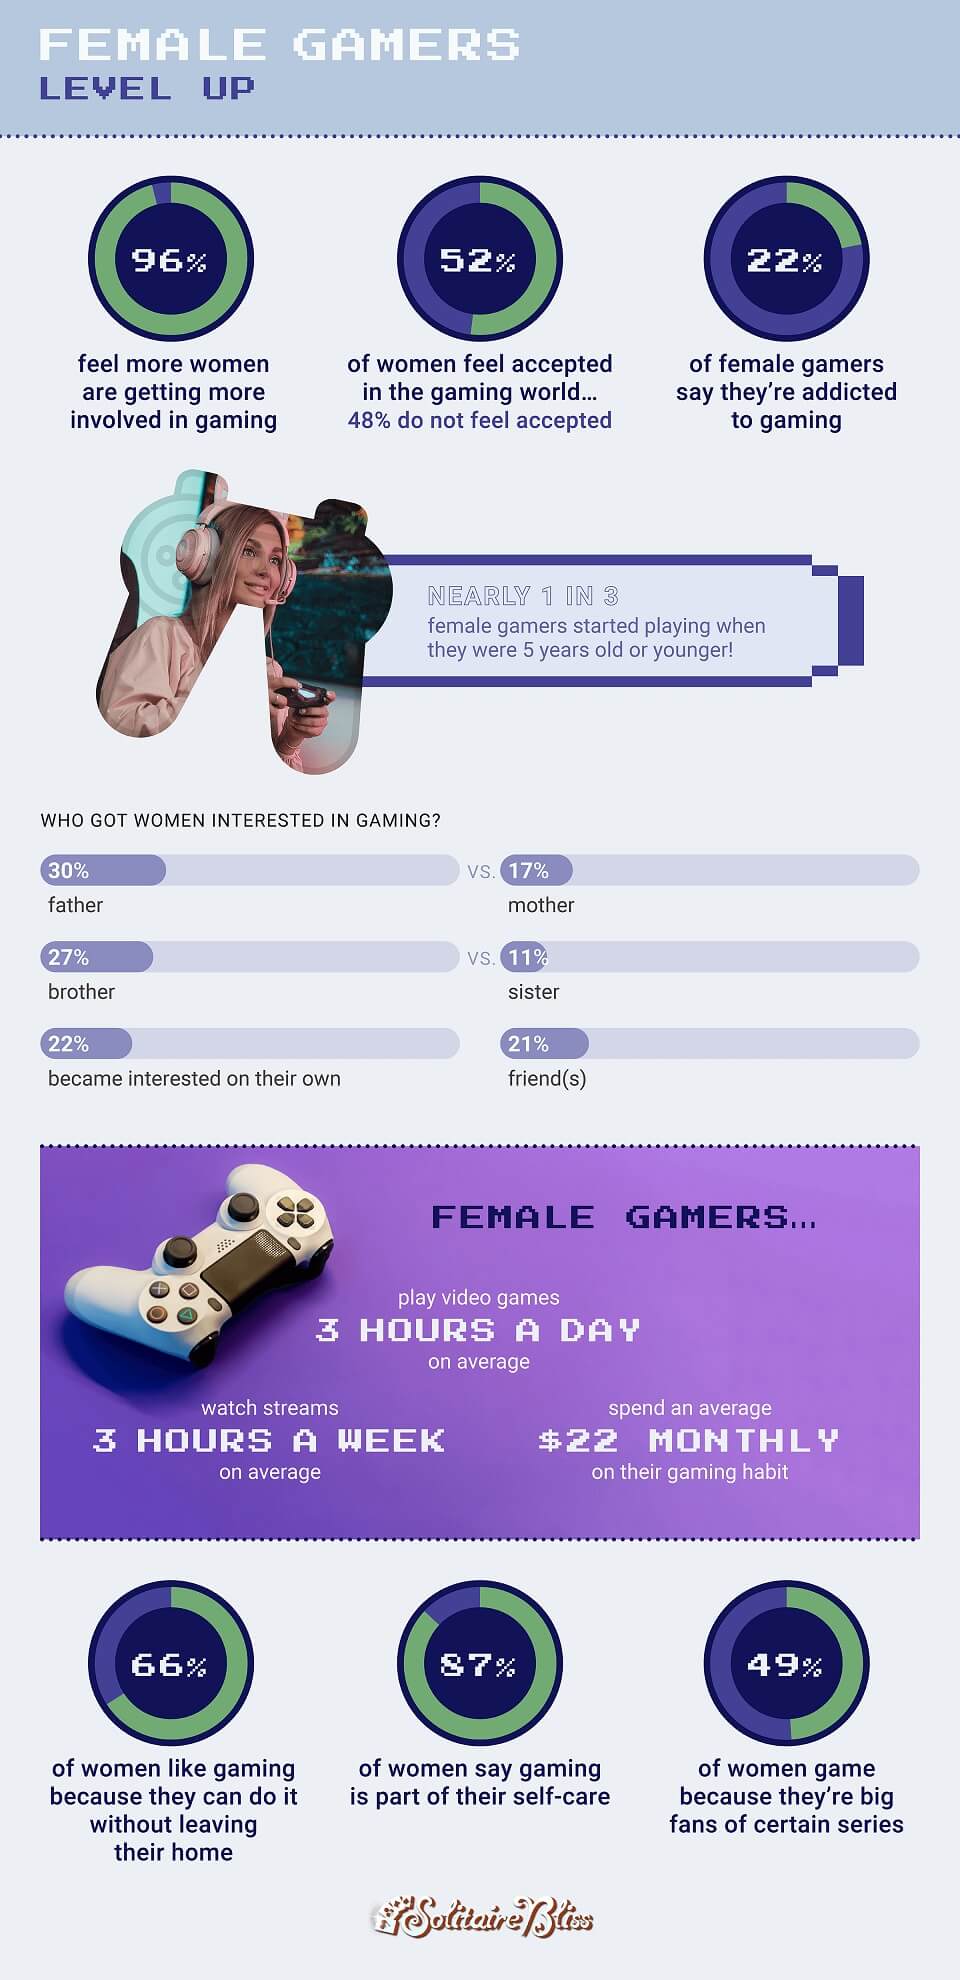 How often women game and who got them interested - study from solitairebliss.com